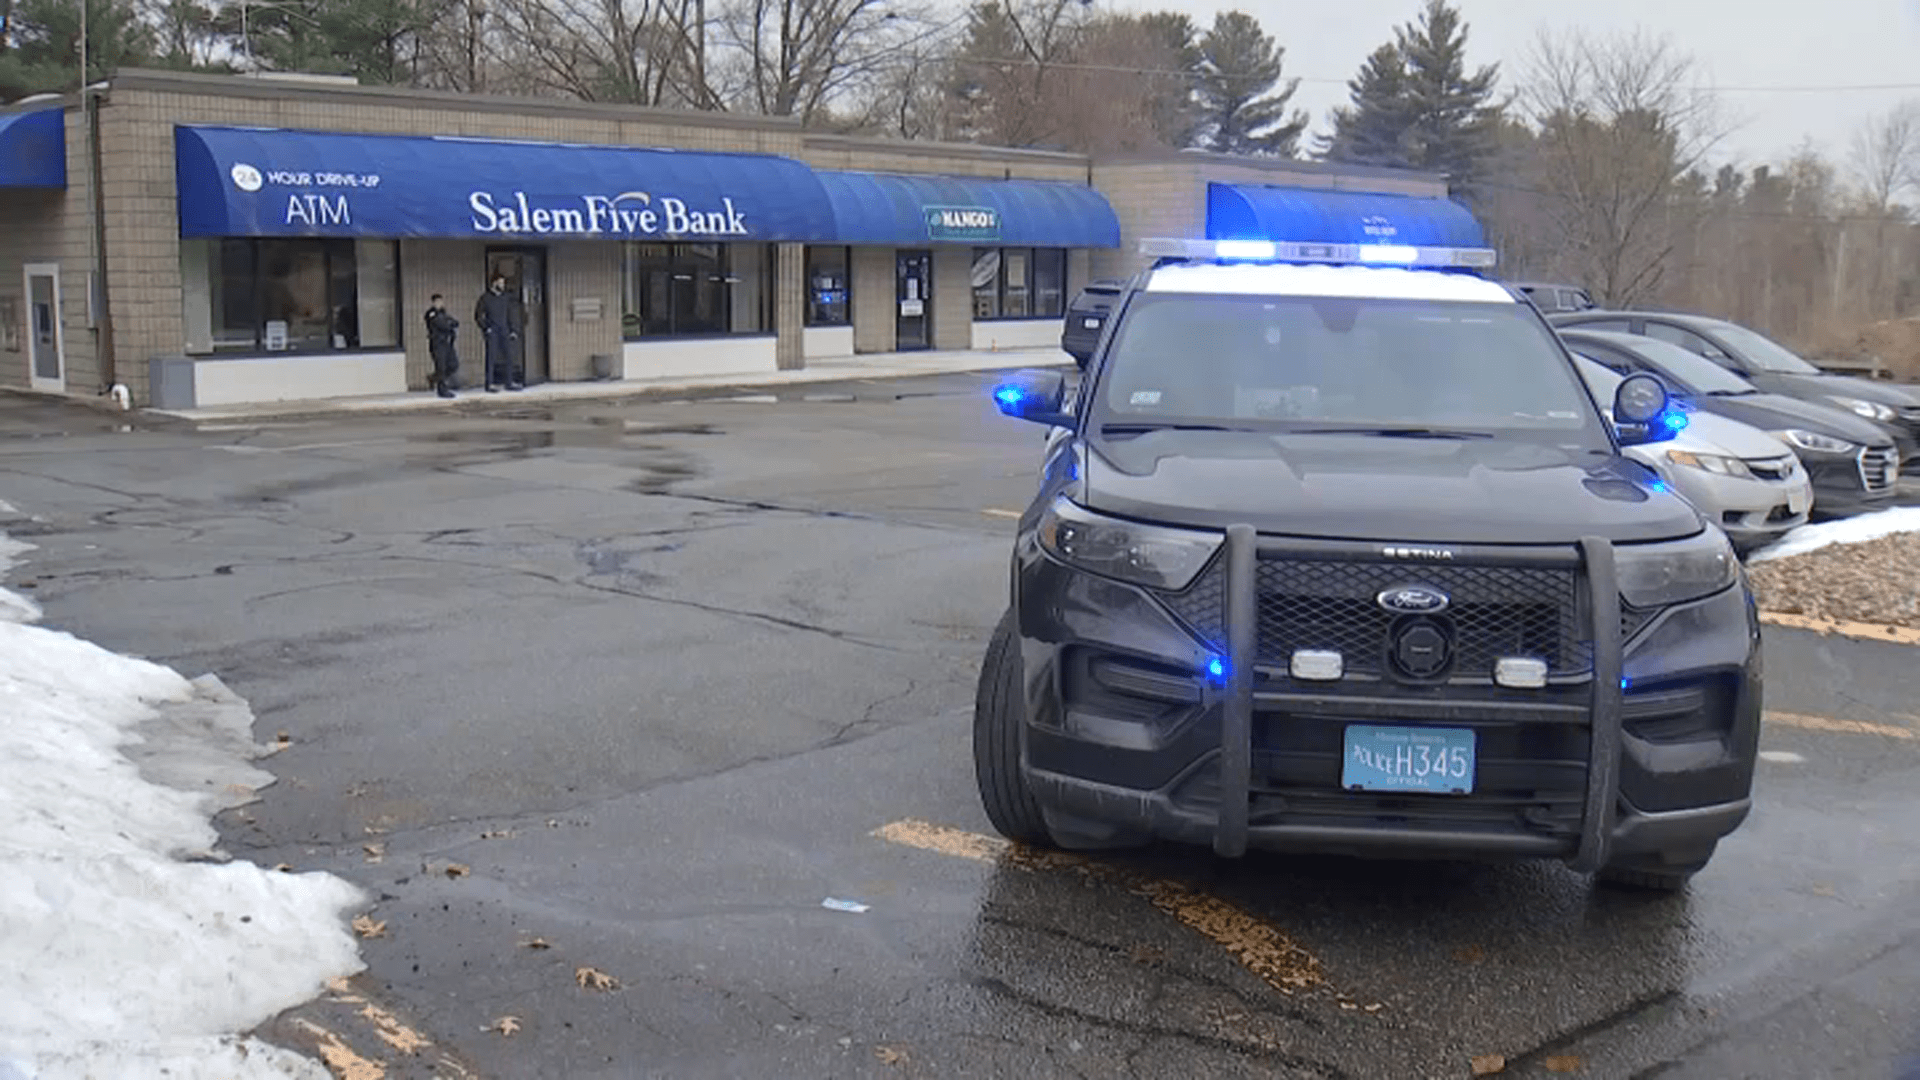 Tewksbury MA Andy's store armed robbery arrest – NBC Boston